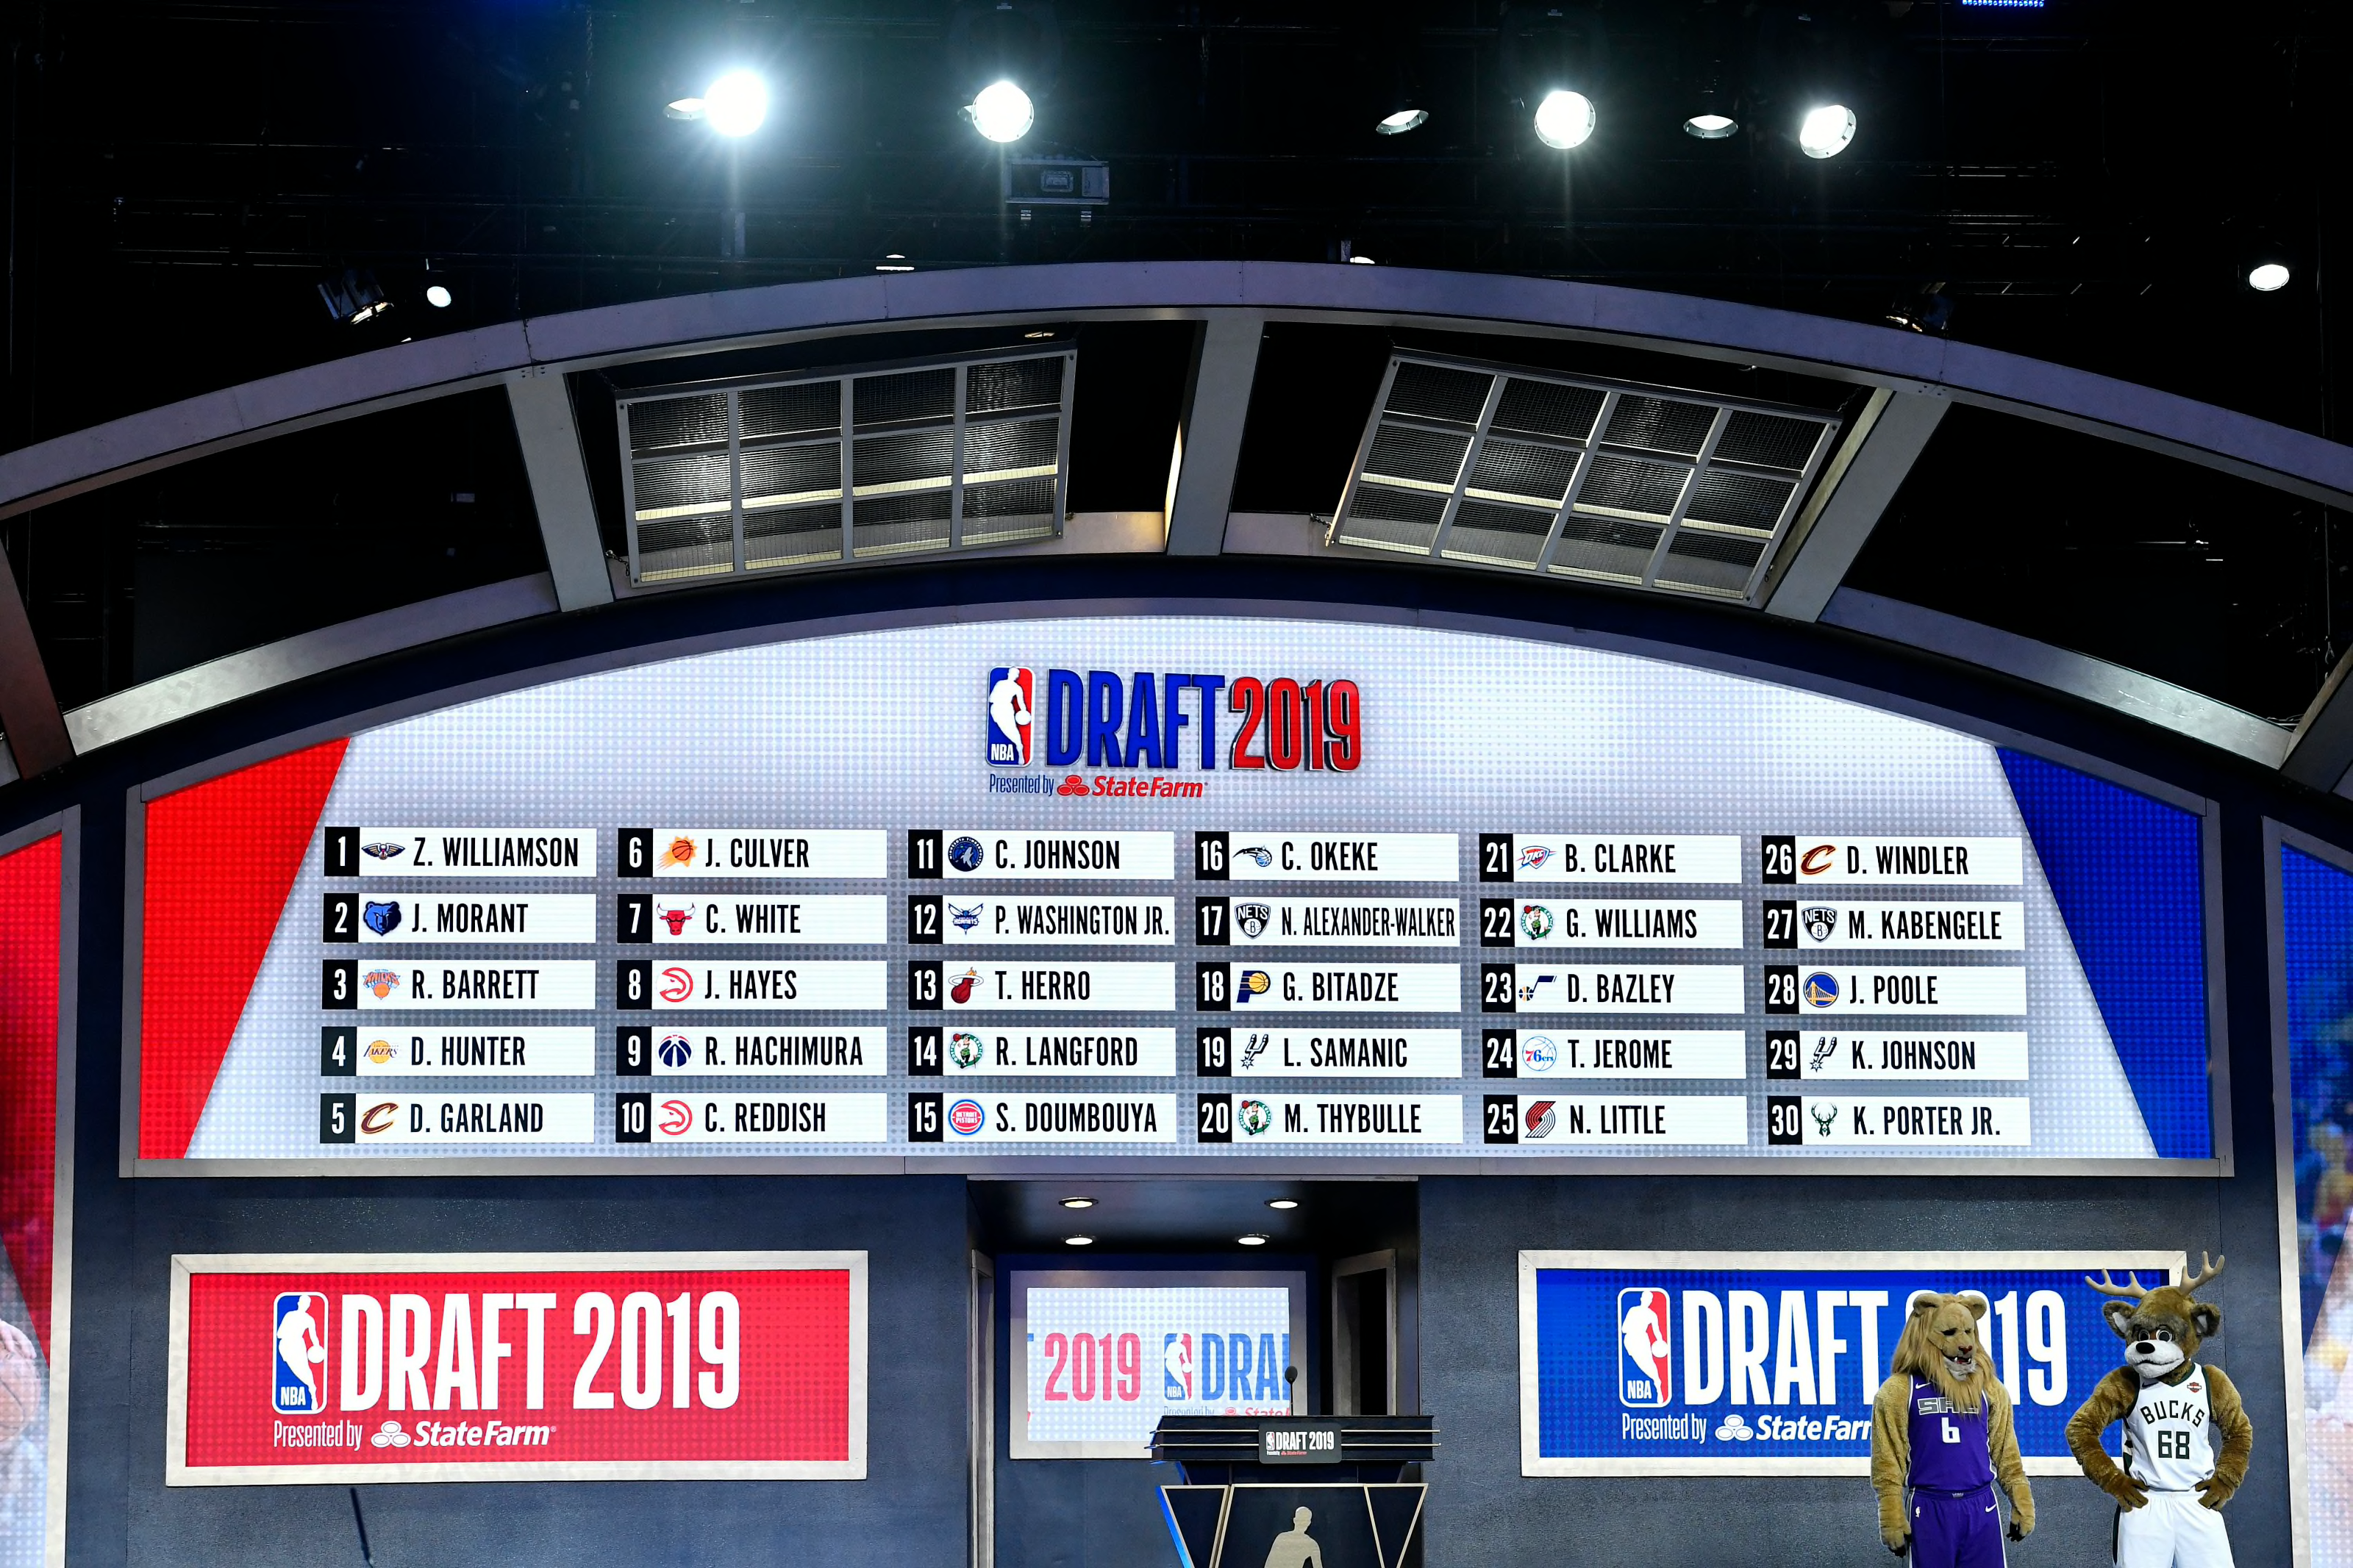 2021 Nba Draft Prospects / 2021 NBA Draft date, time and where to see